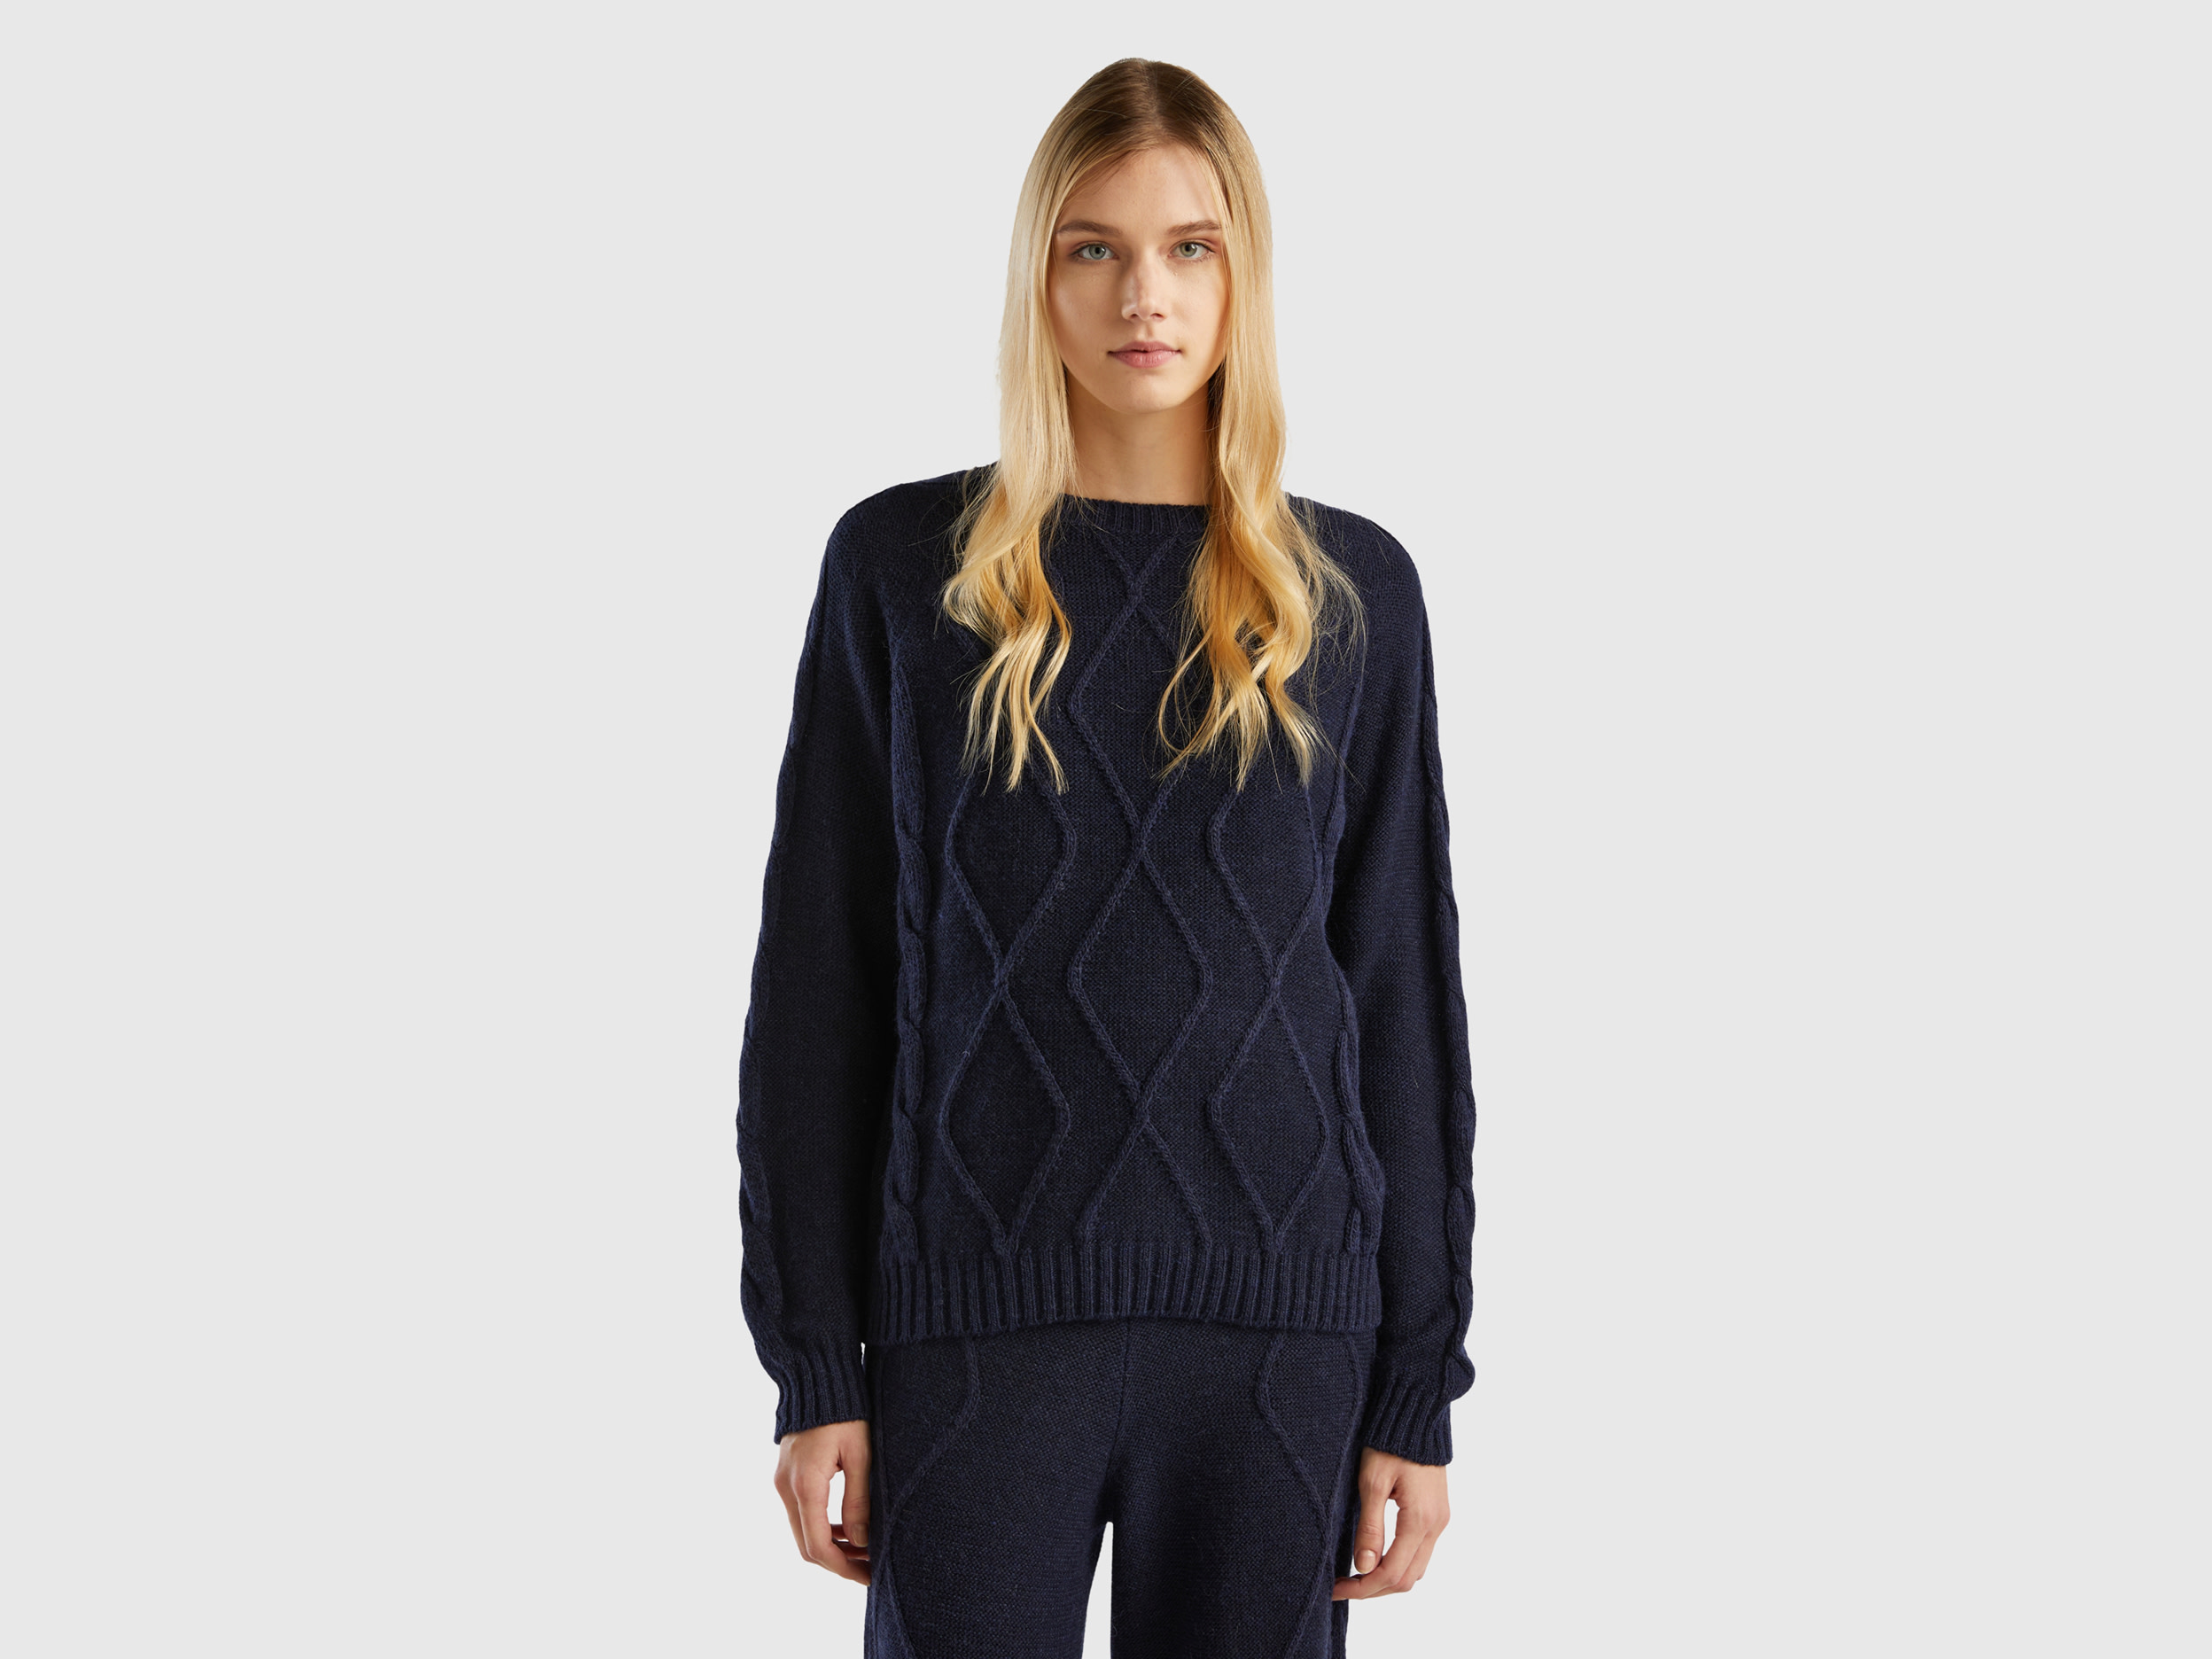 Benetton, Sweater With Cables And Diamonds, size M, Dark Blue, Women